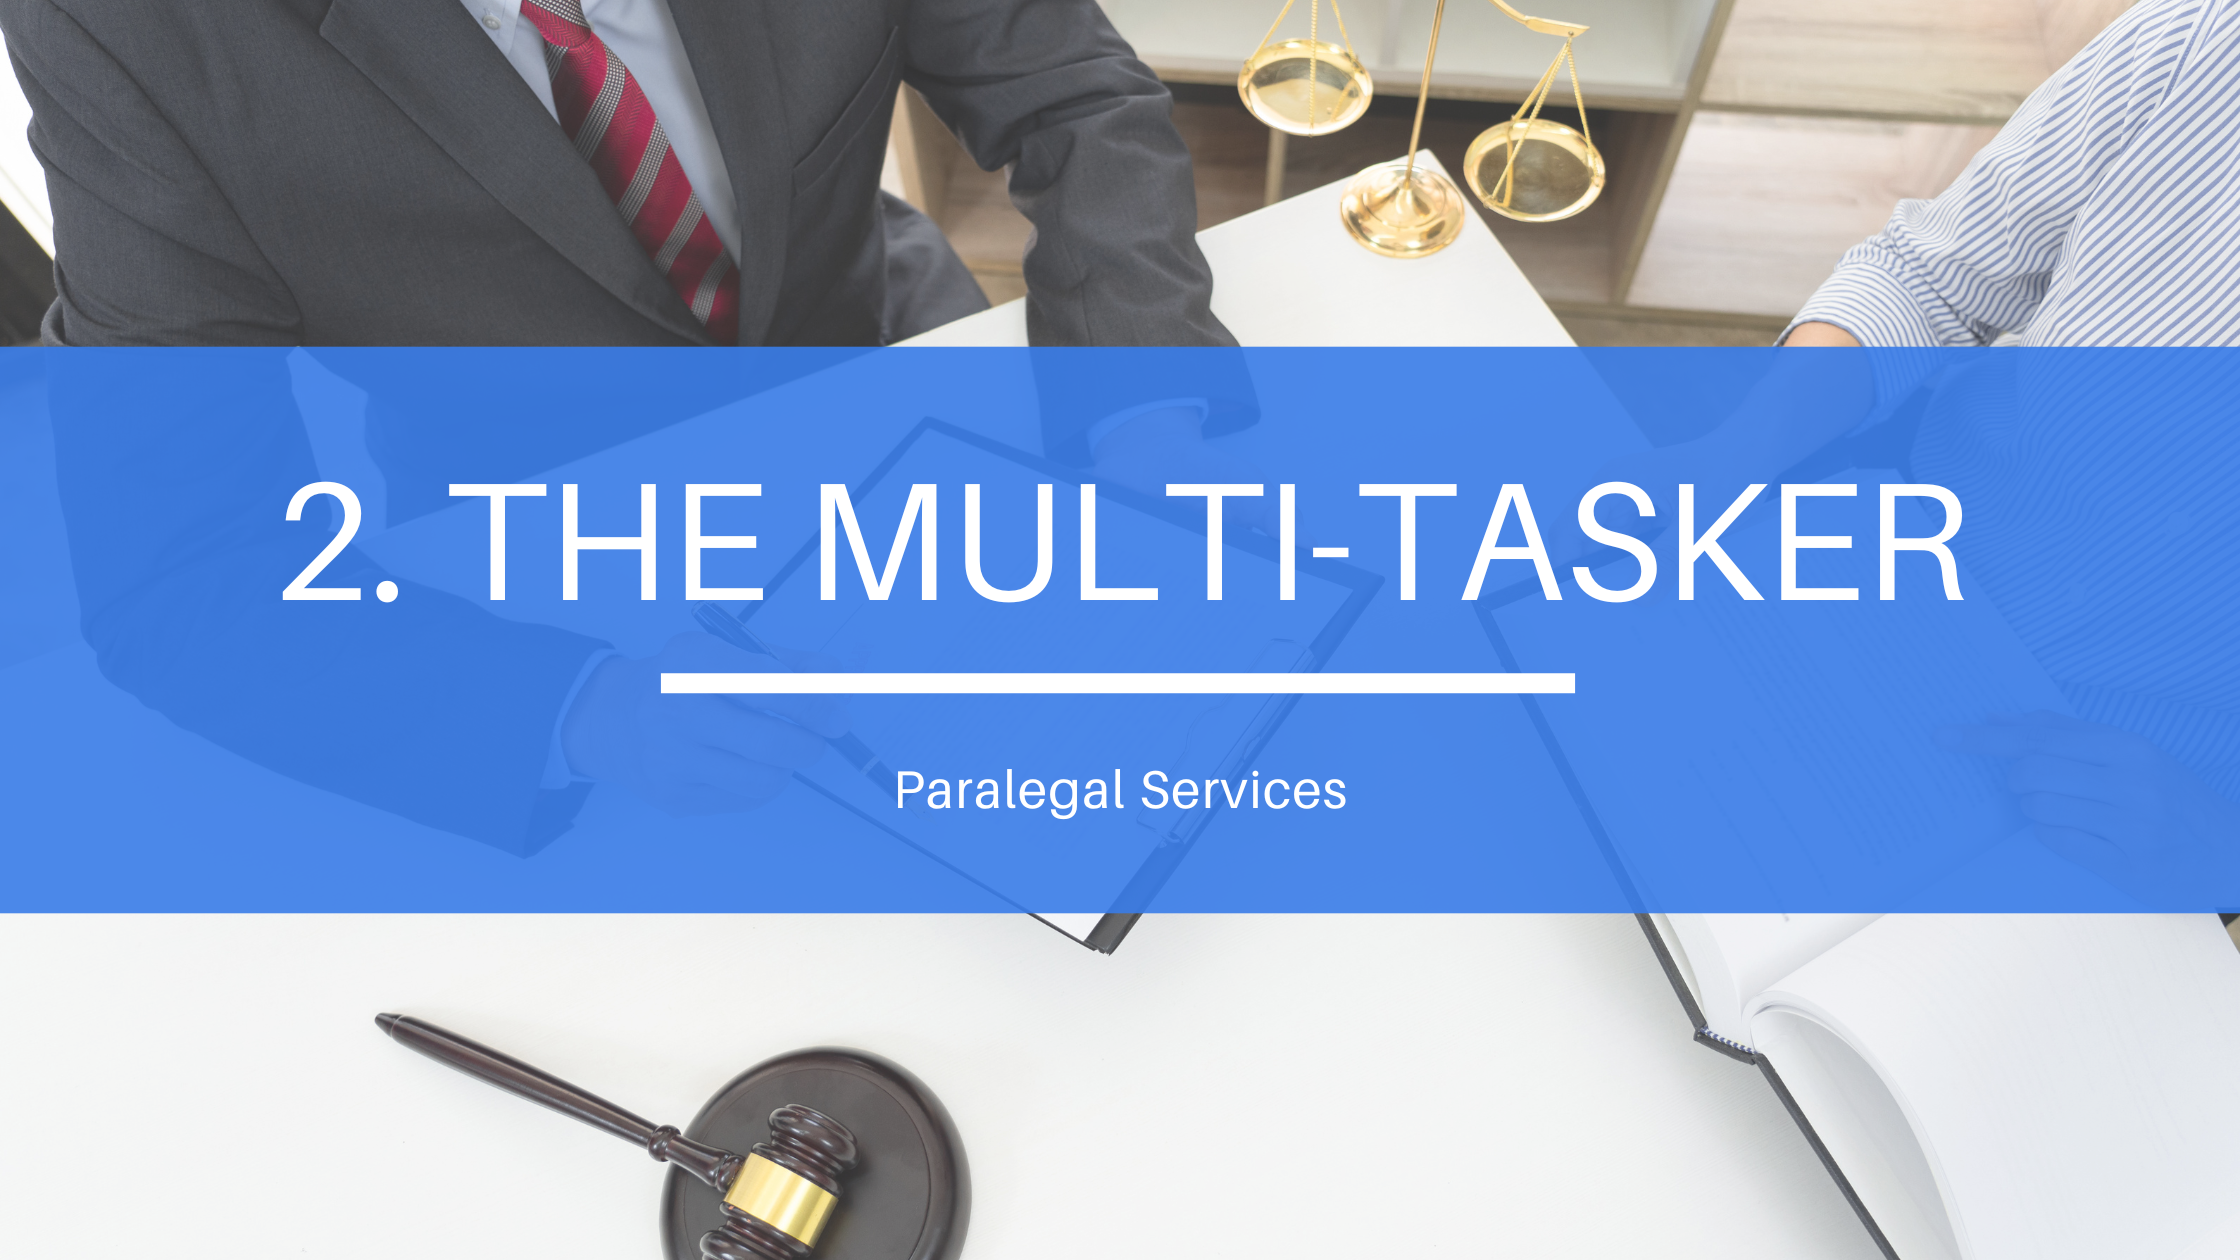 Paralegal services